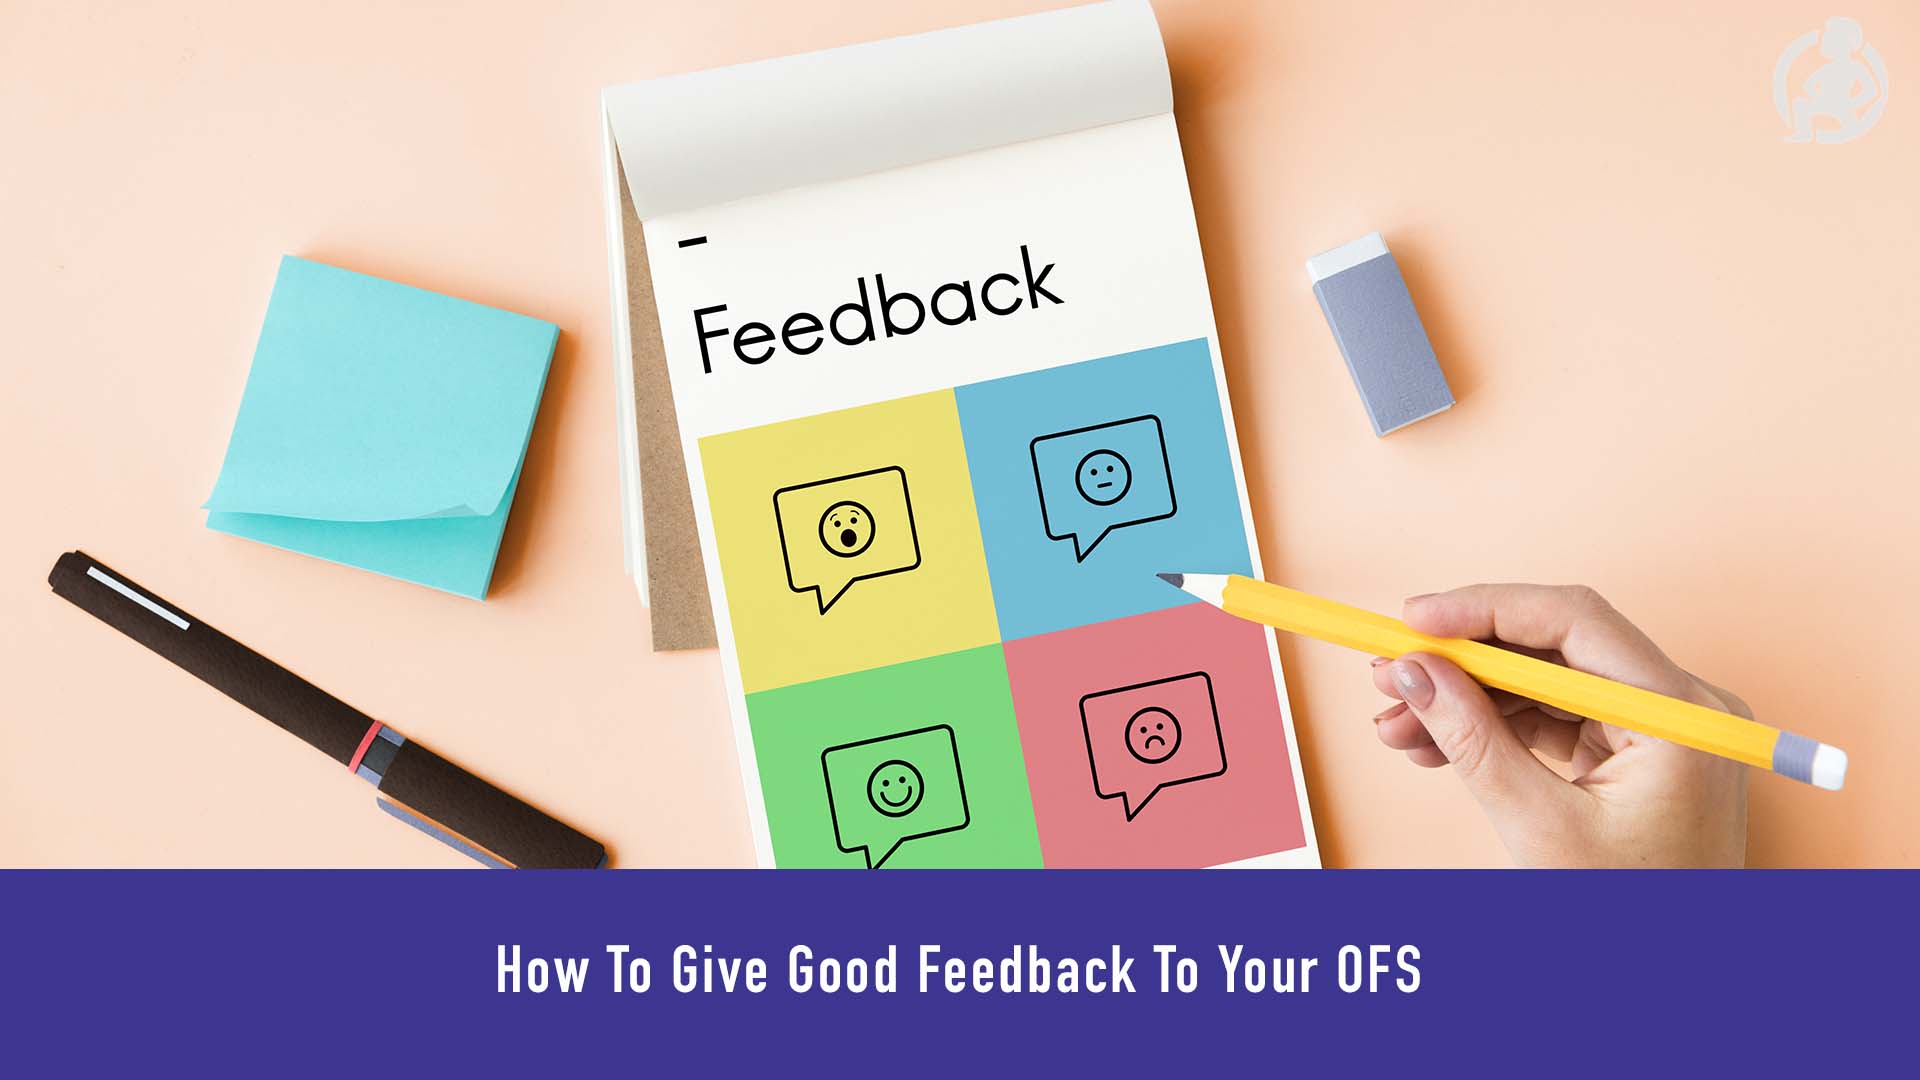 How To Give Good Feedback To Your OFS